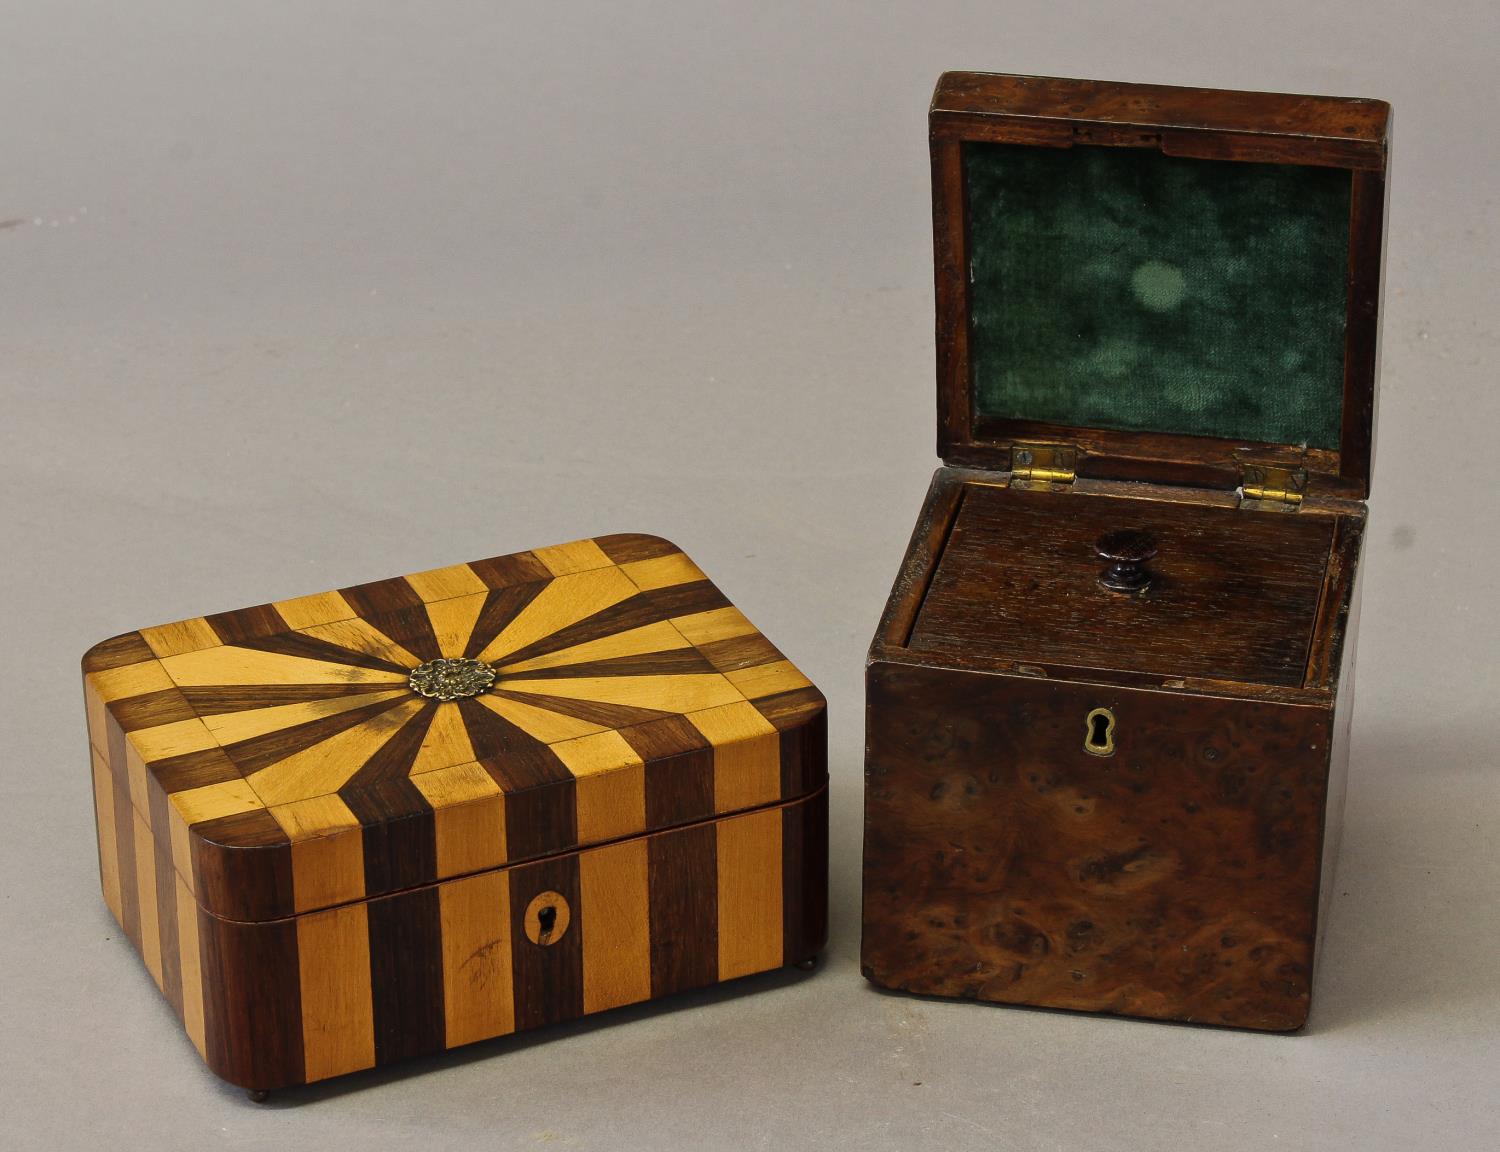 A NINETEENTH CENTURY FRENCH JEWELLERY OR STATIONERY BOX AND ANOTHER, The French box with radiating